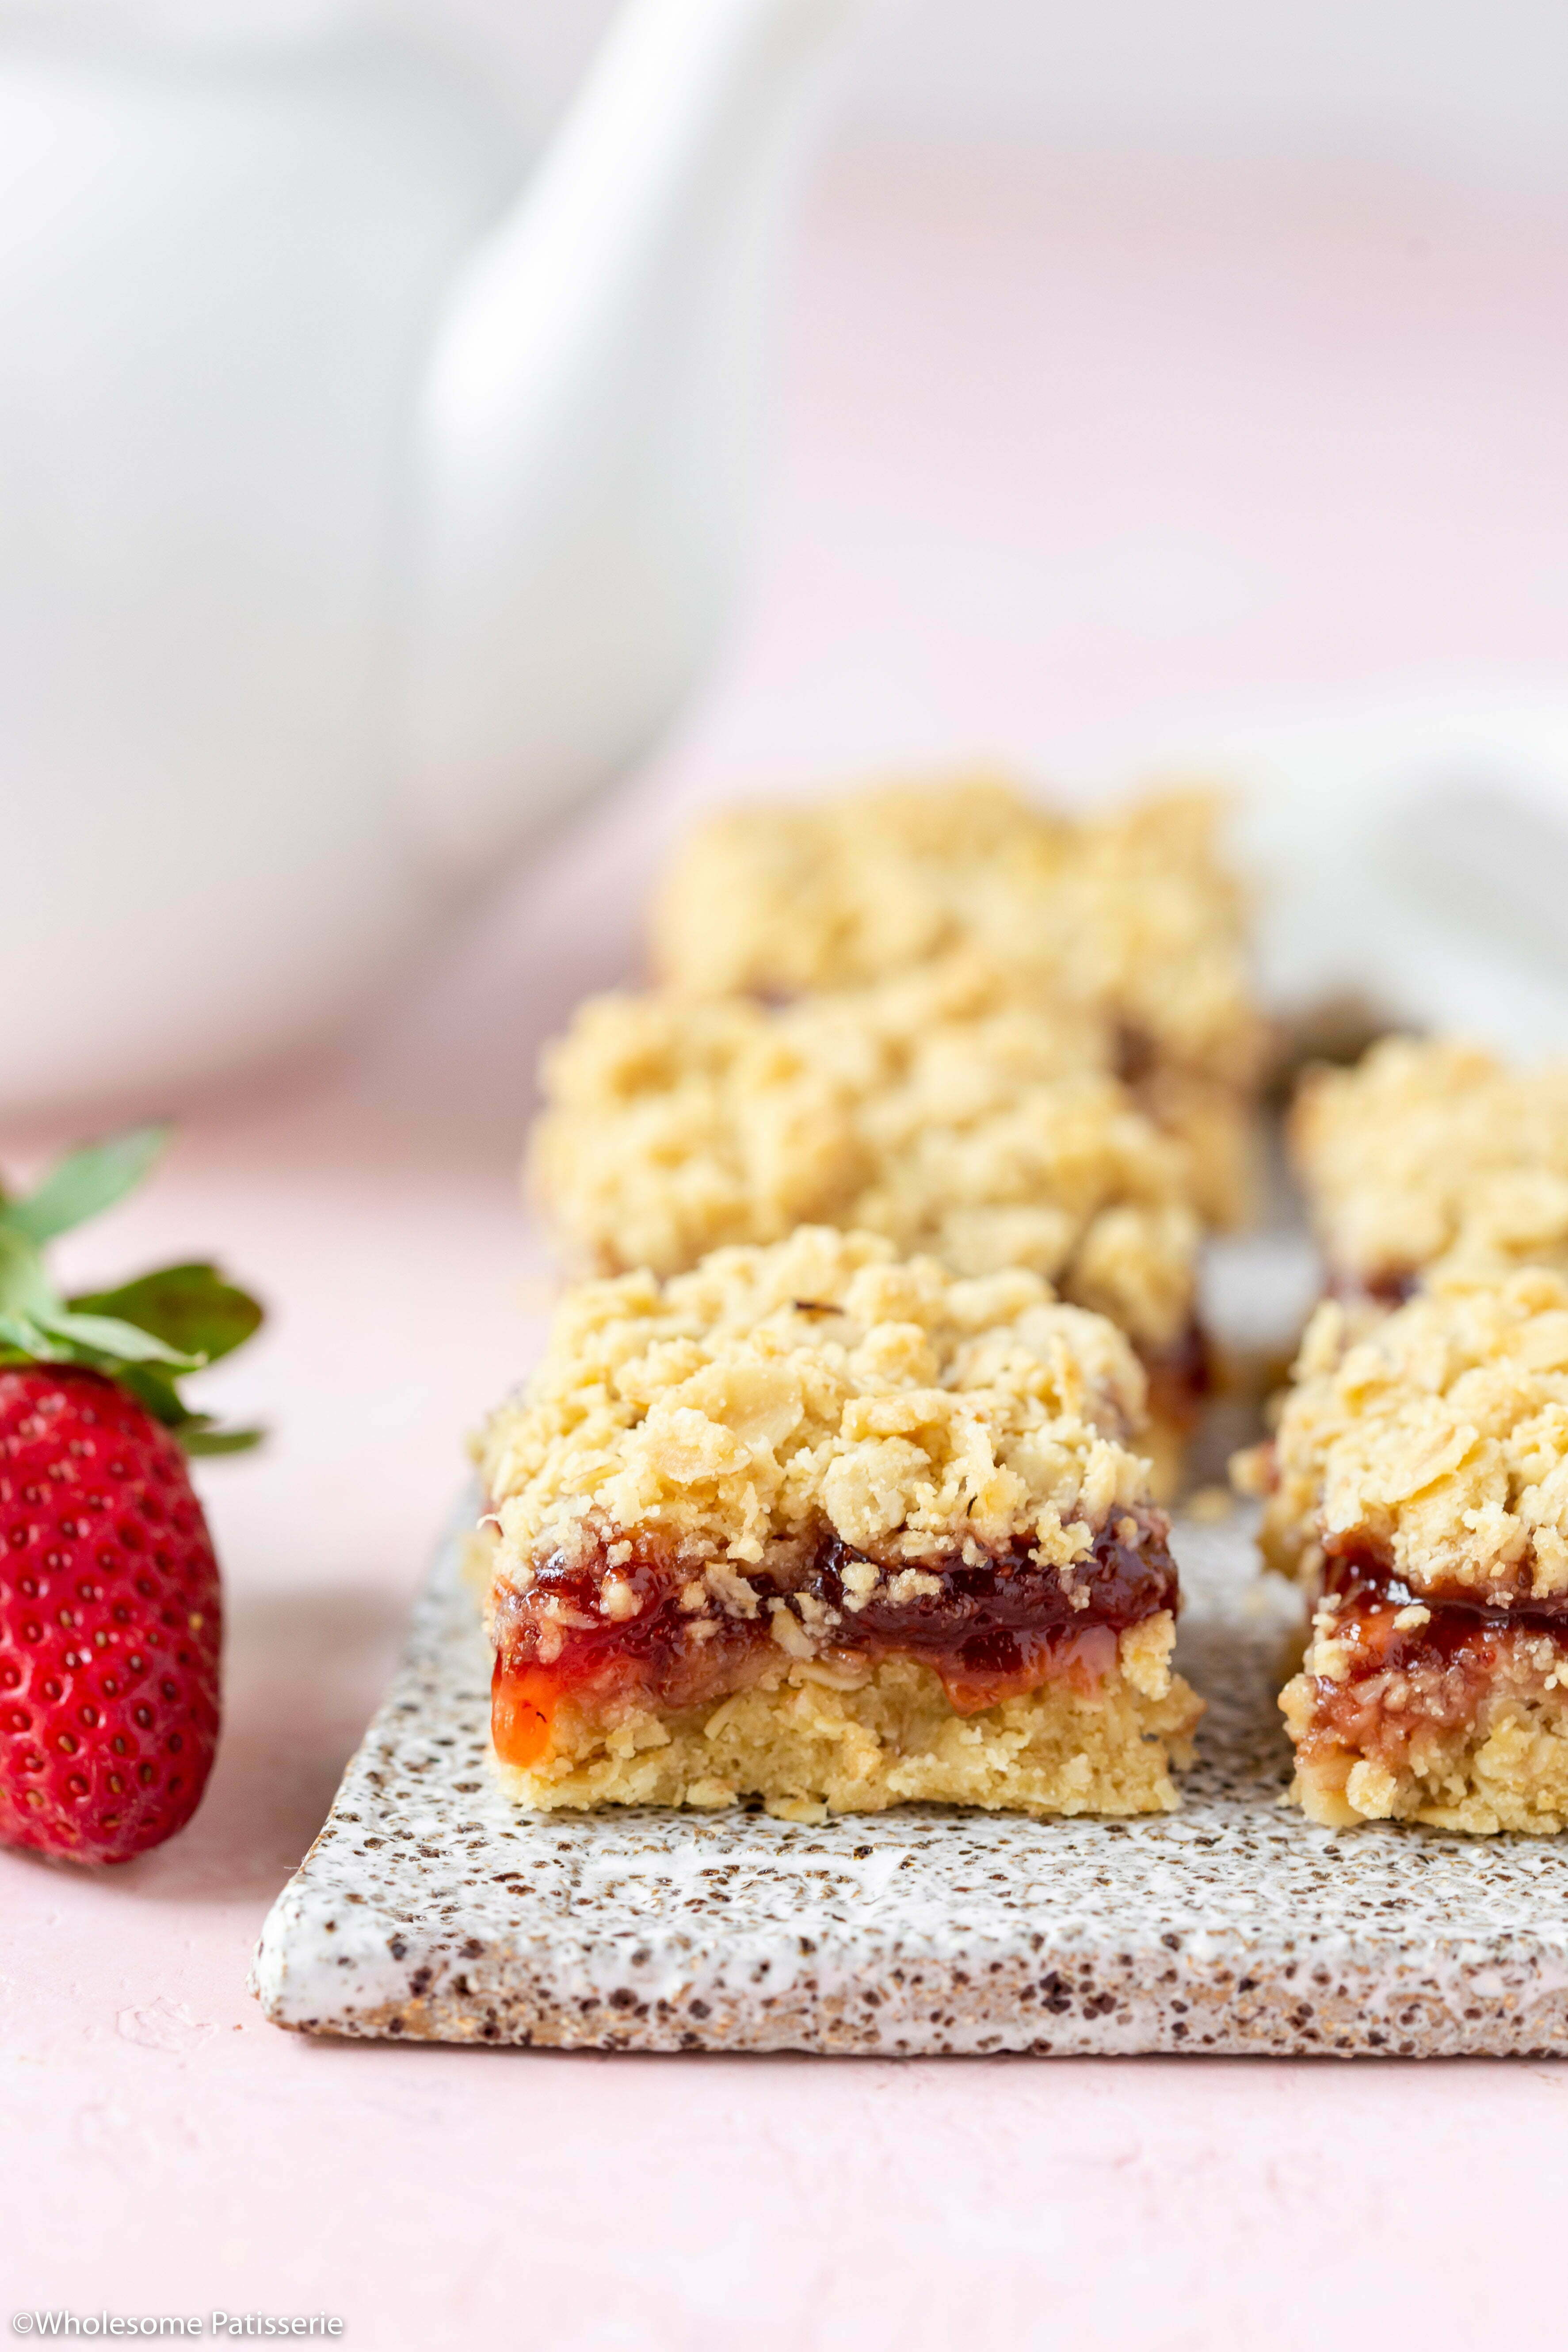 A close up image of one of the bars showing the strawberry jam oozing from the middle. 